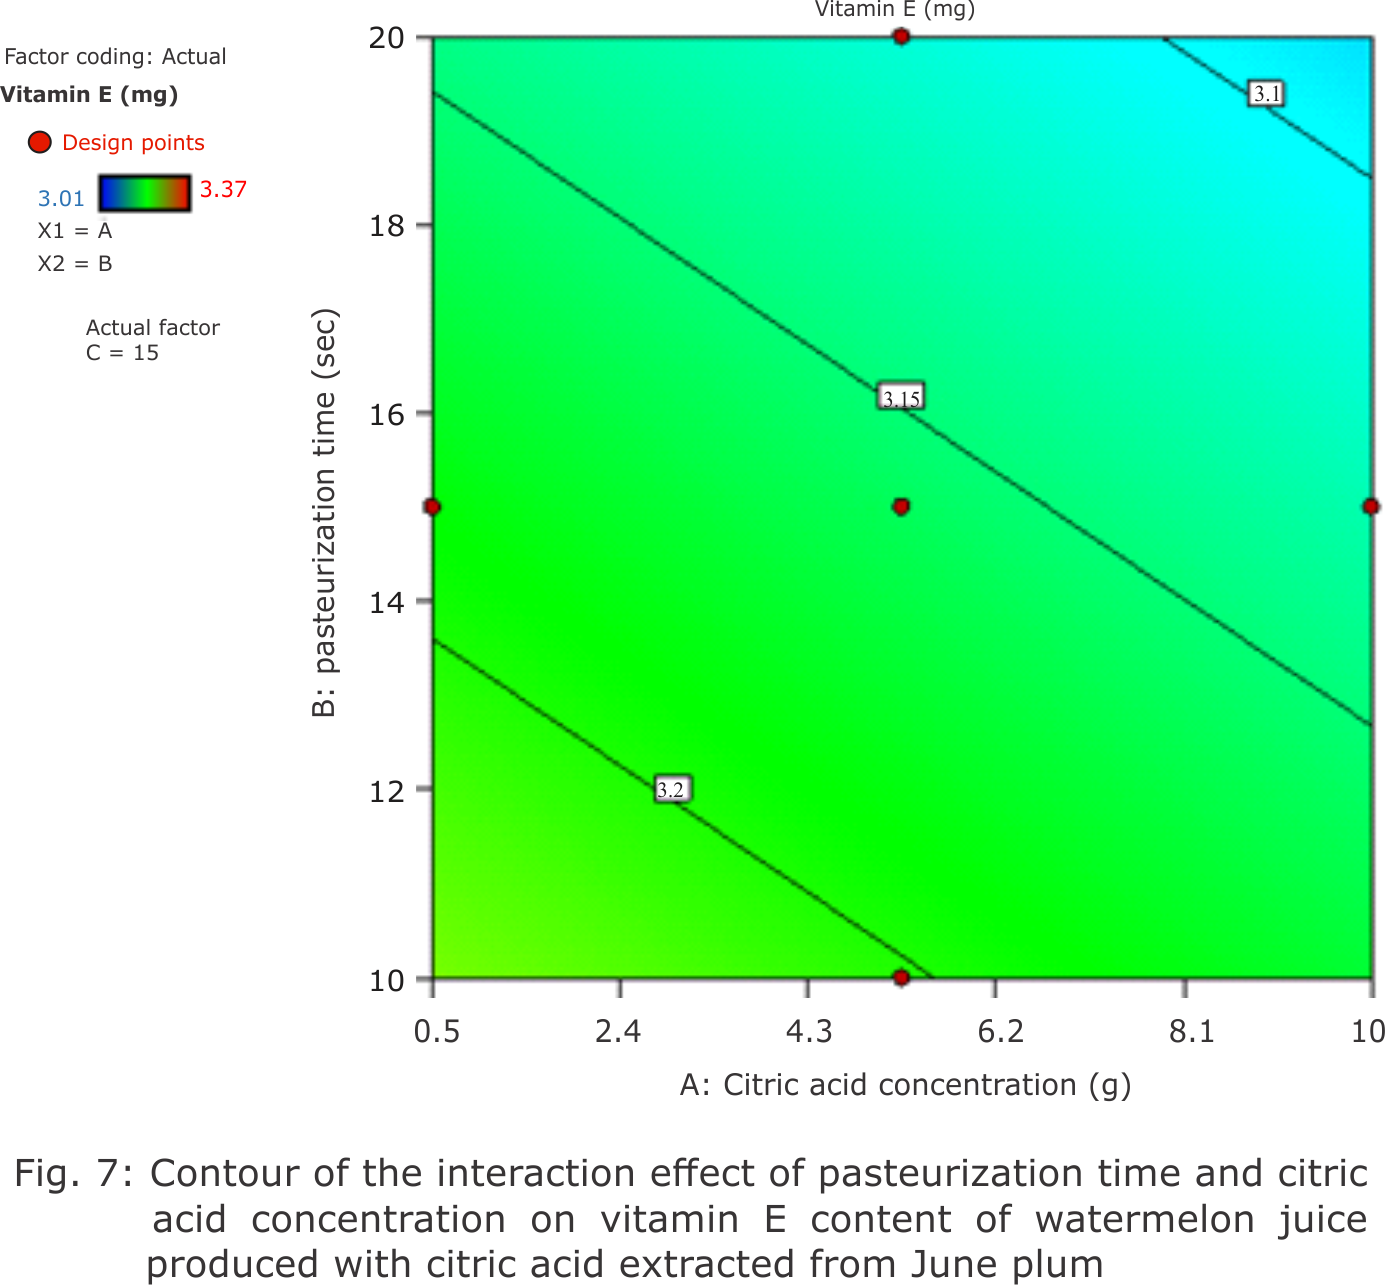 Fig. 7: Contour of the interaction effect of pasteurization time and citric acid concentration on vitamin E content of watermelon 	juice produced with citric acid extracted from June plum